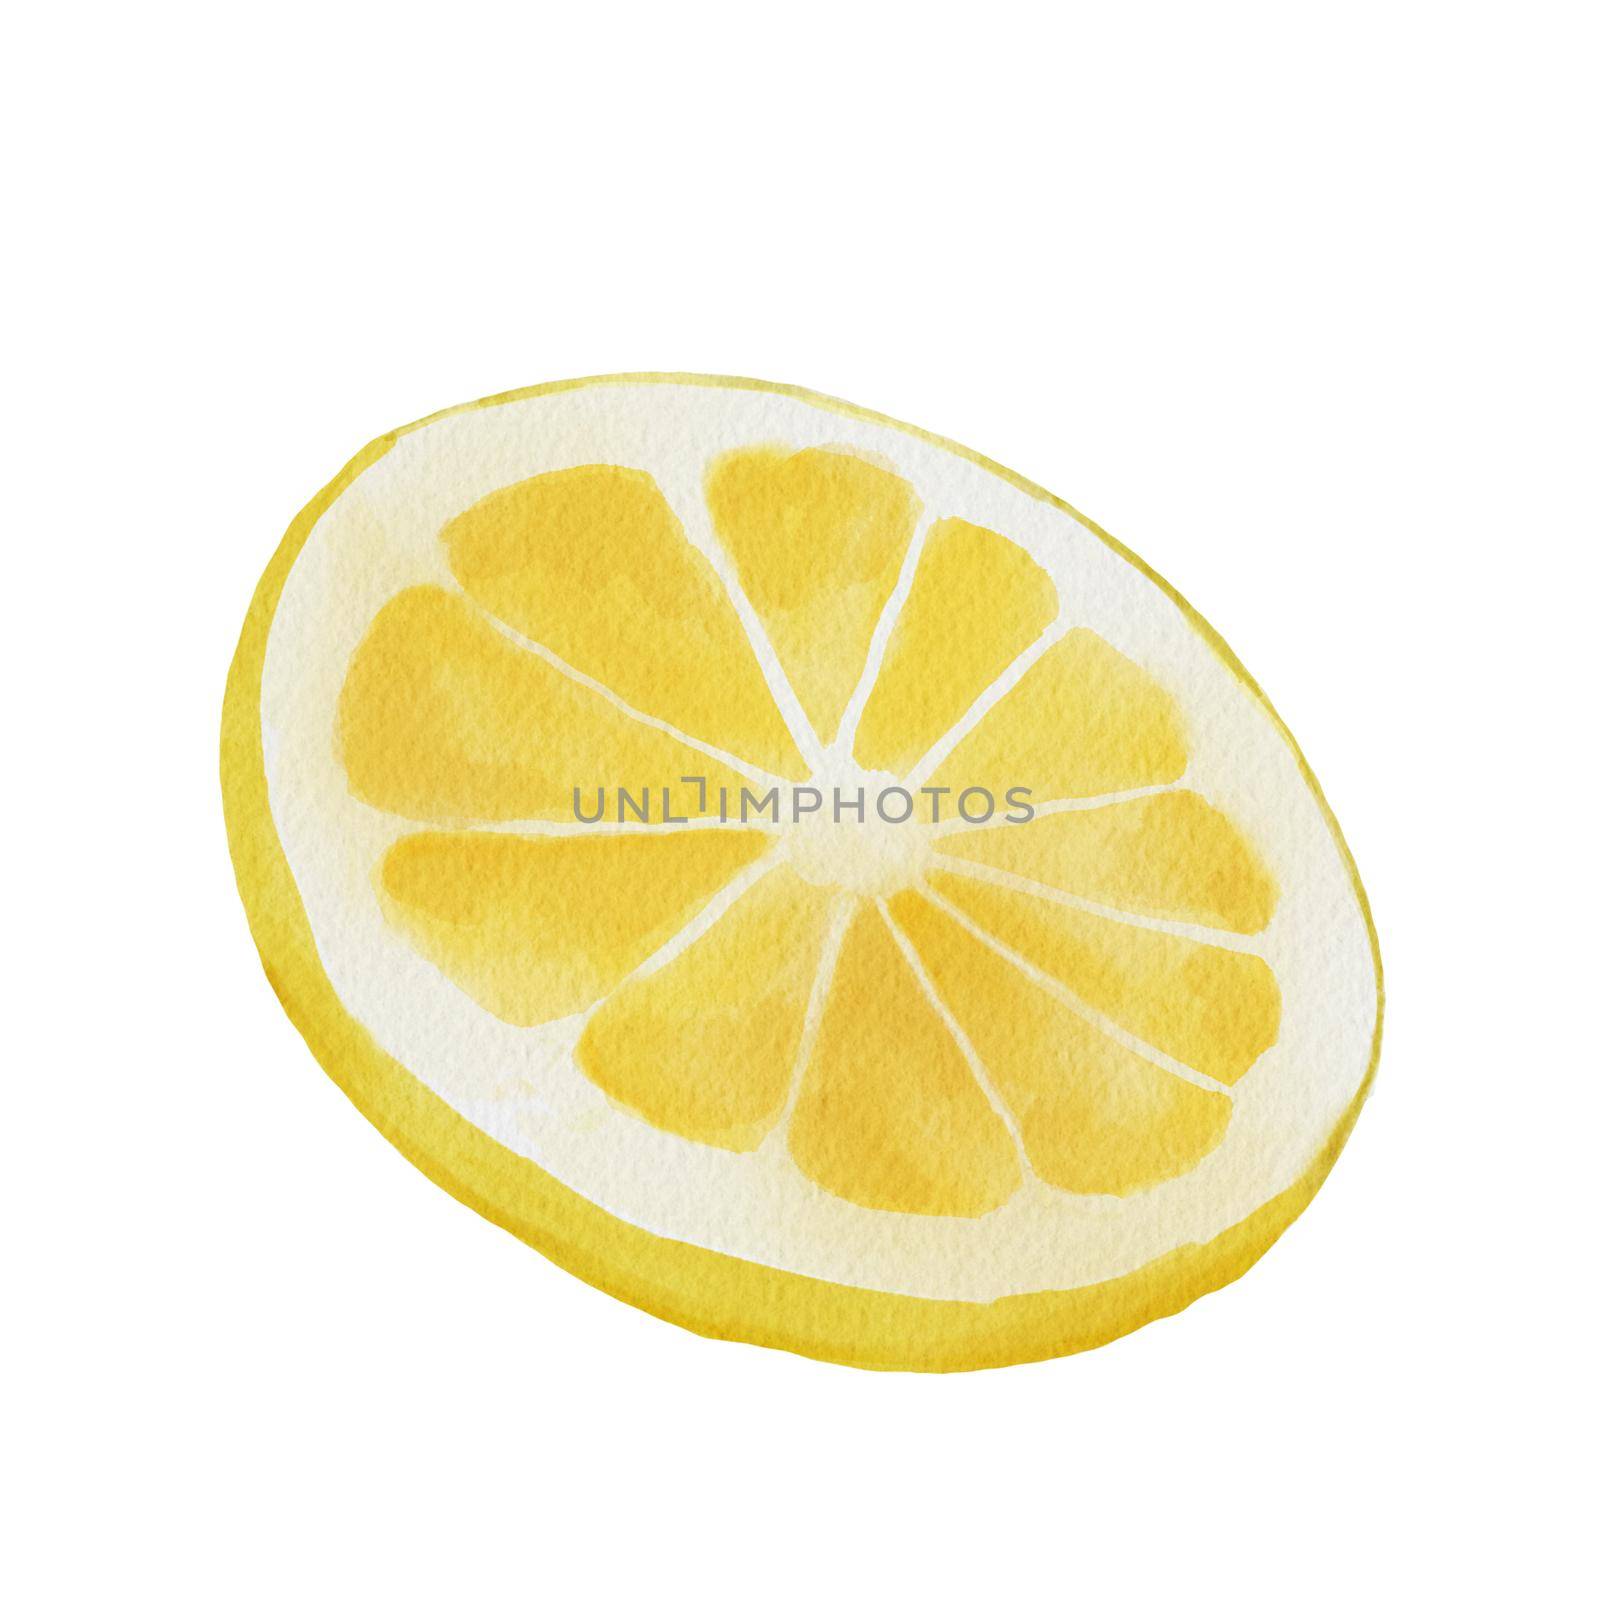 Watercolor Hand drawn lemon piece isolated on white background. Citrus fruits food illustration.